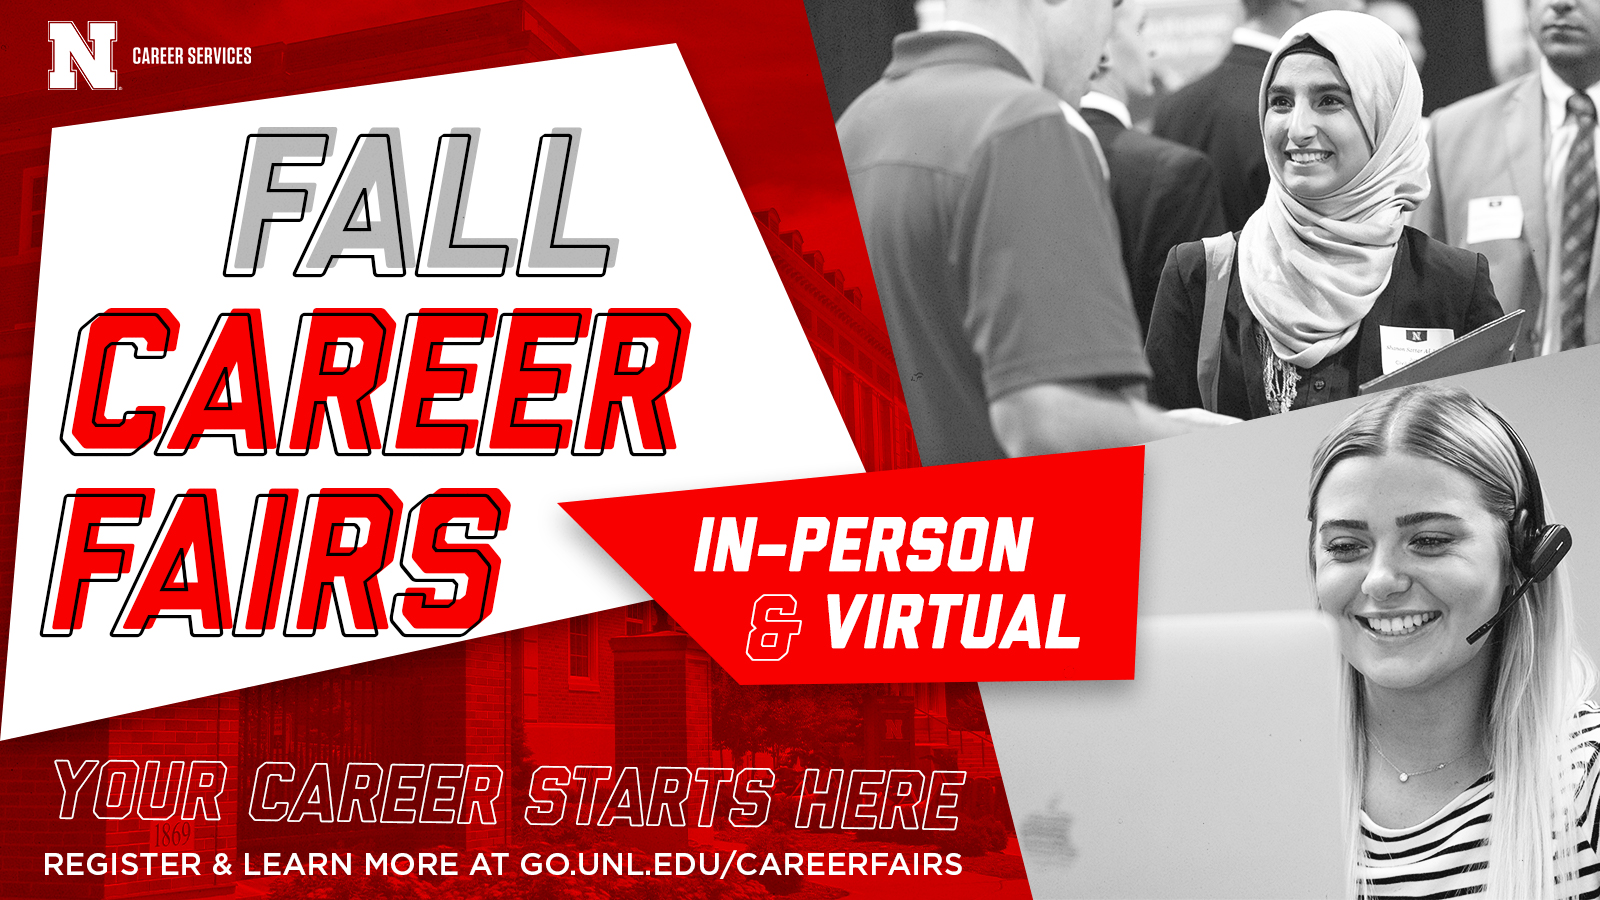 Fall Career Fairs are in-person and virtual 